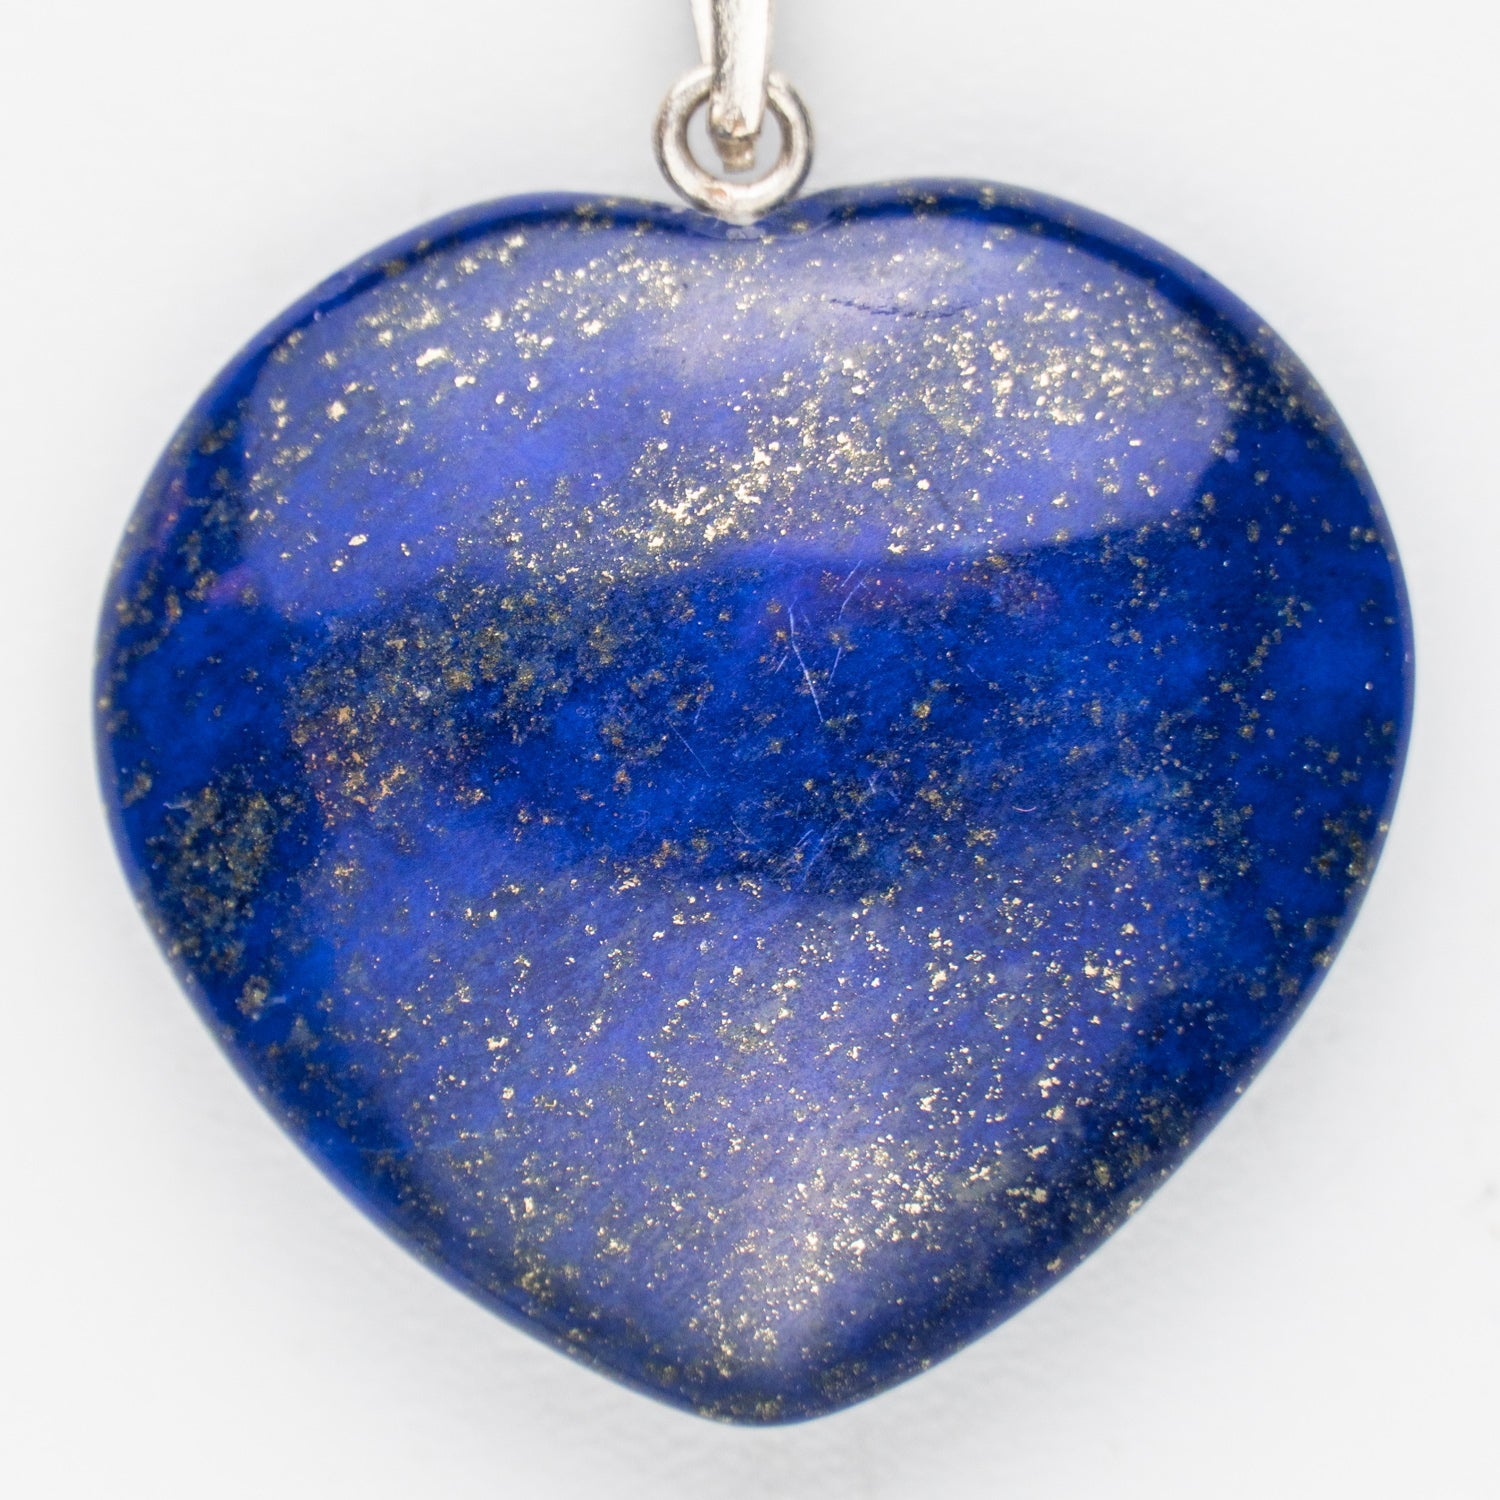 Genuine Lapis Lazuli Heart Pendant (4-6 grams) with Sterling Silver Chain